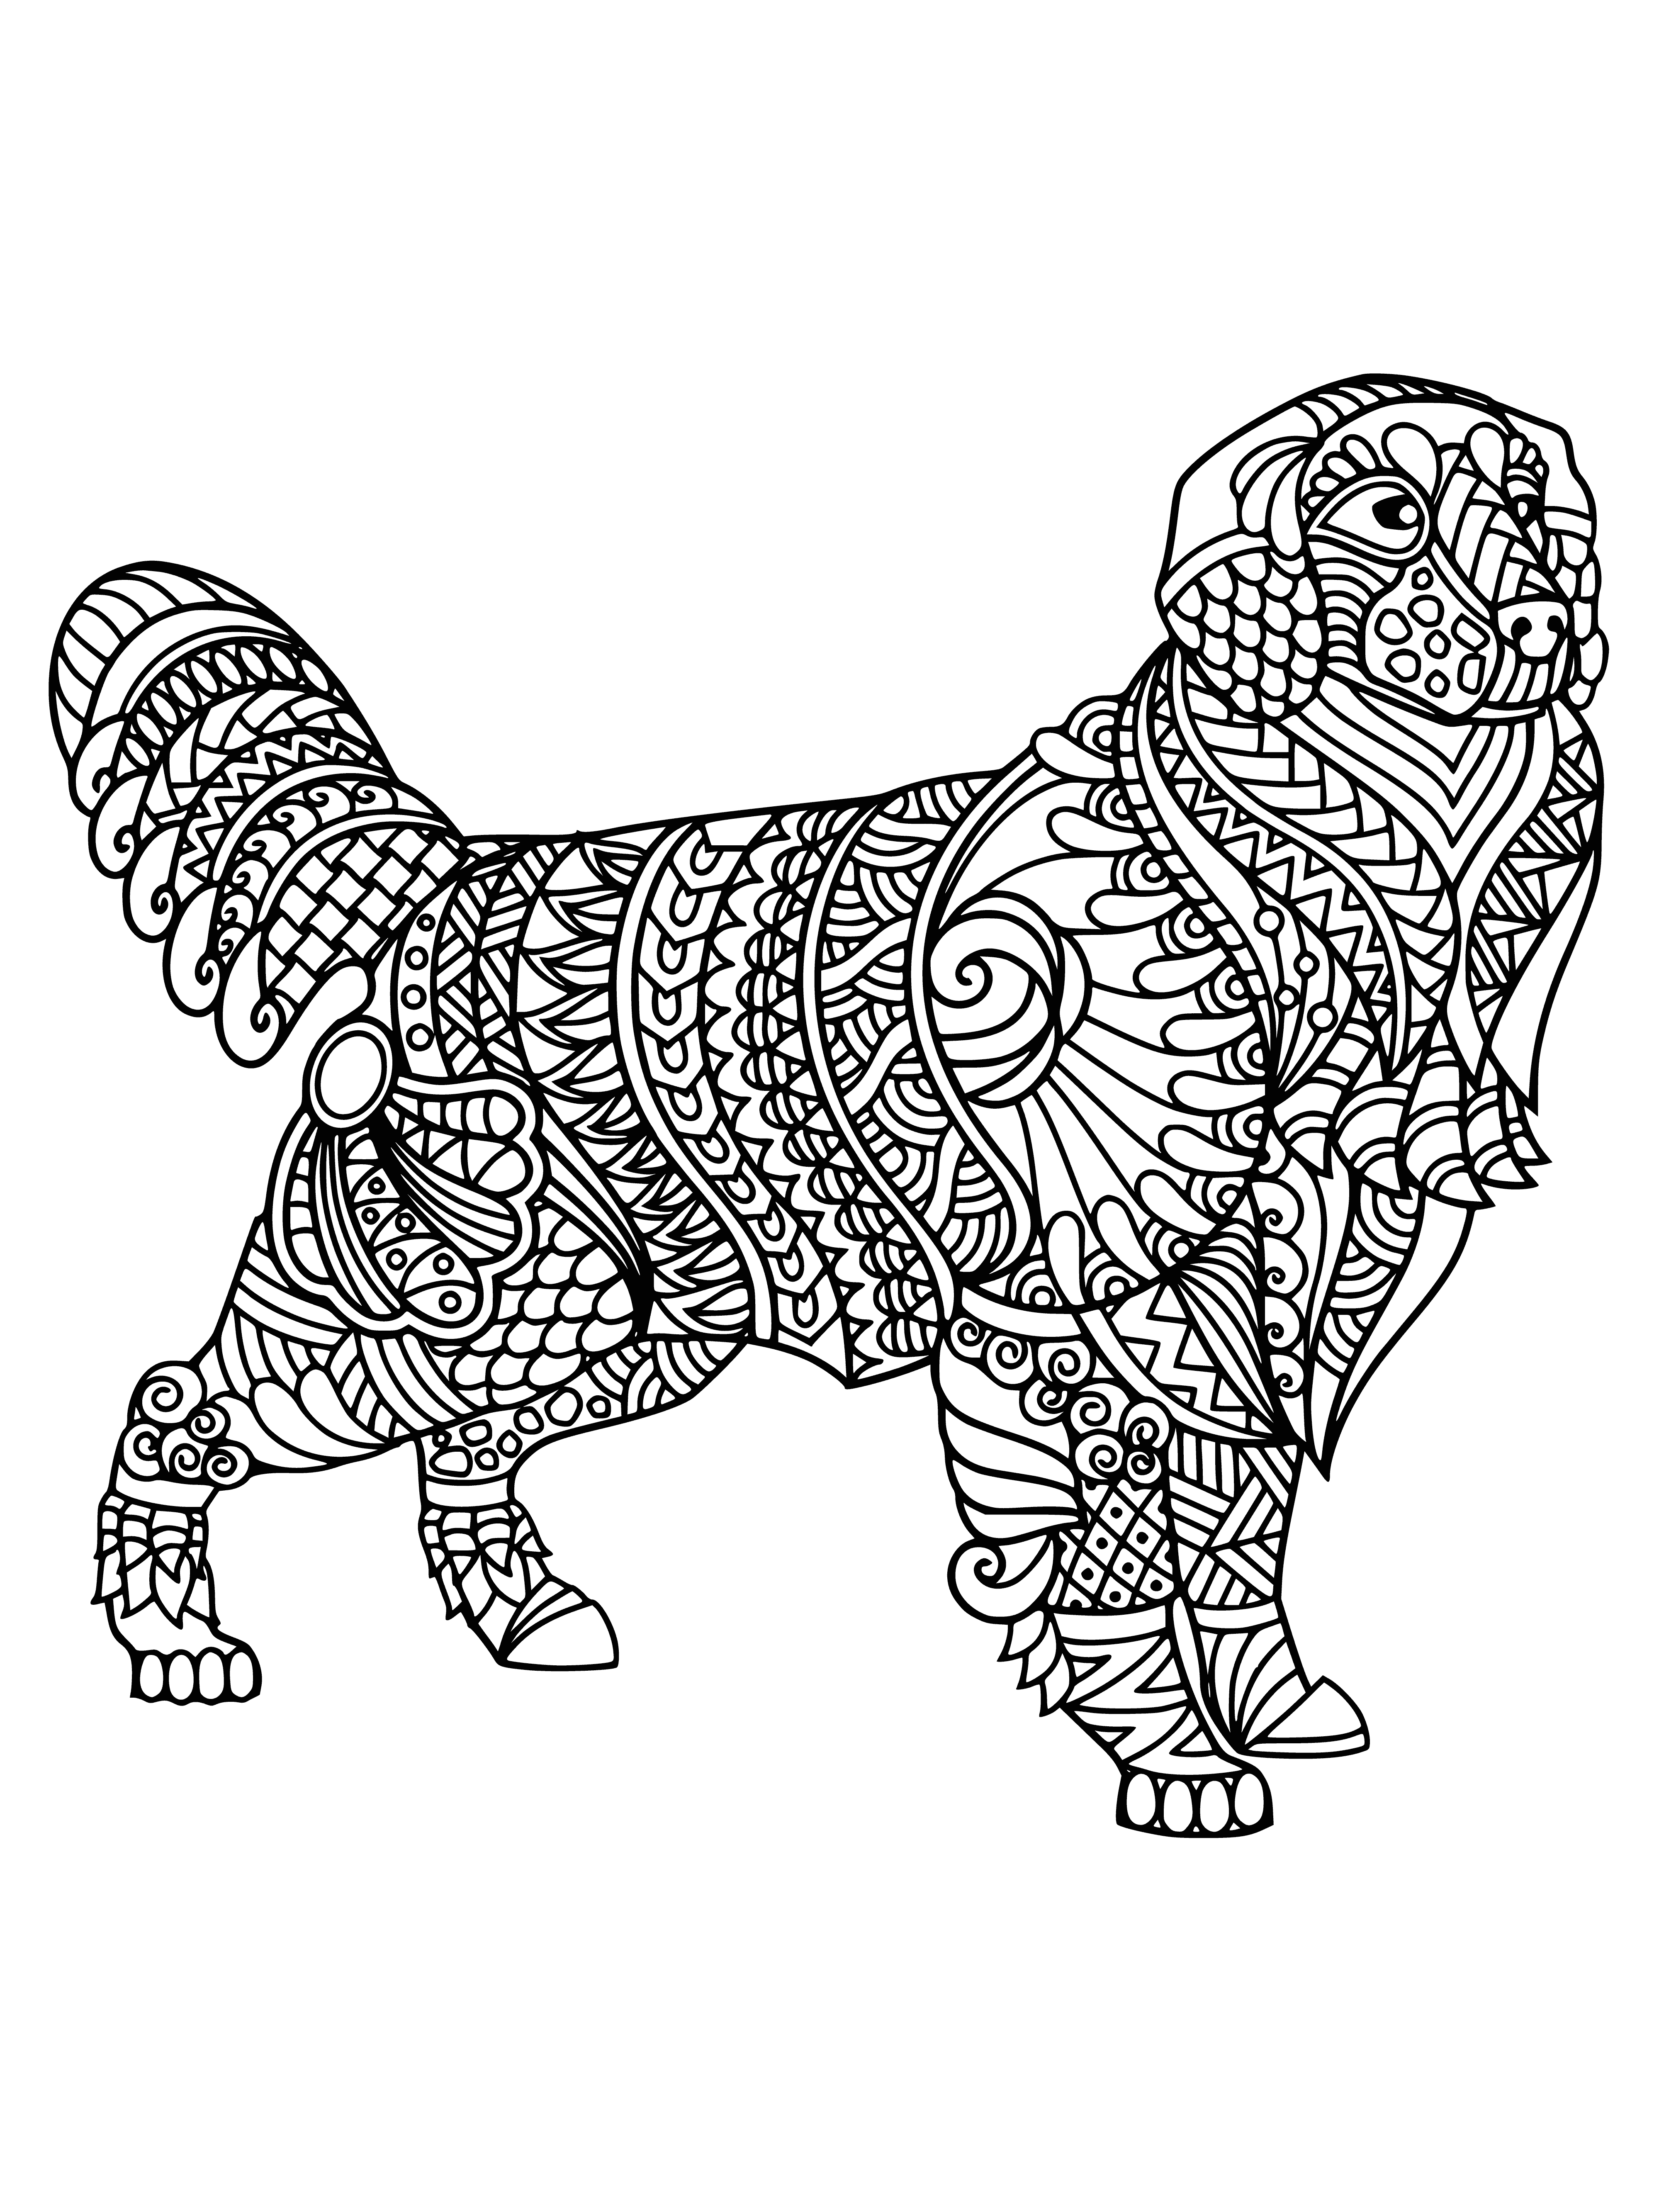 Golden retriever coloring page